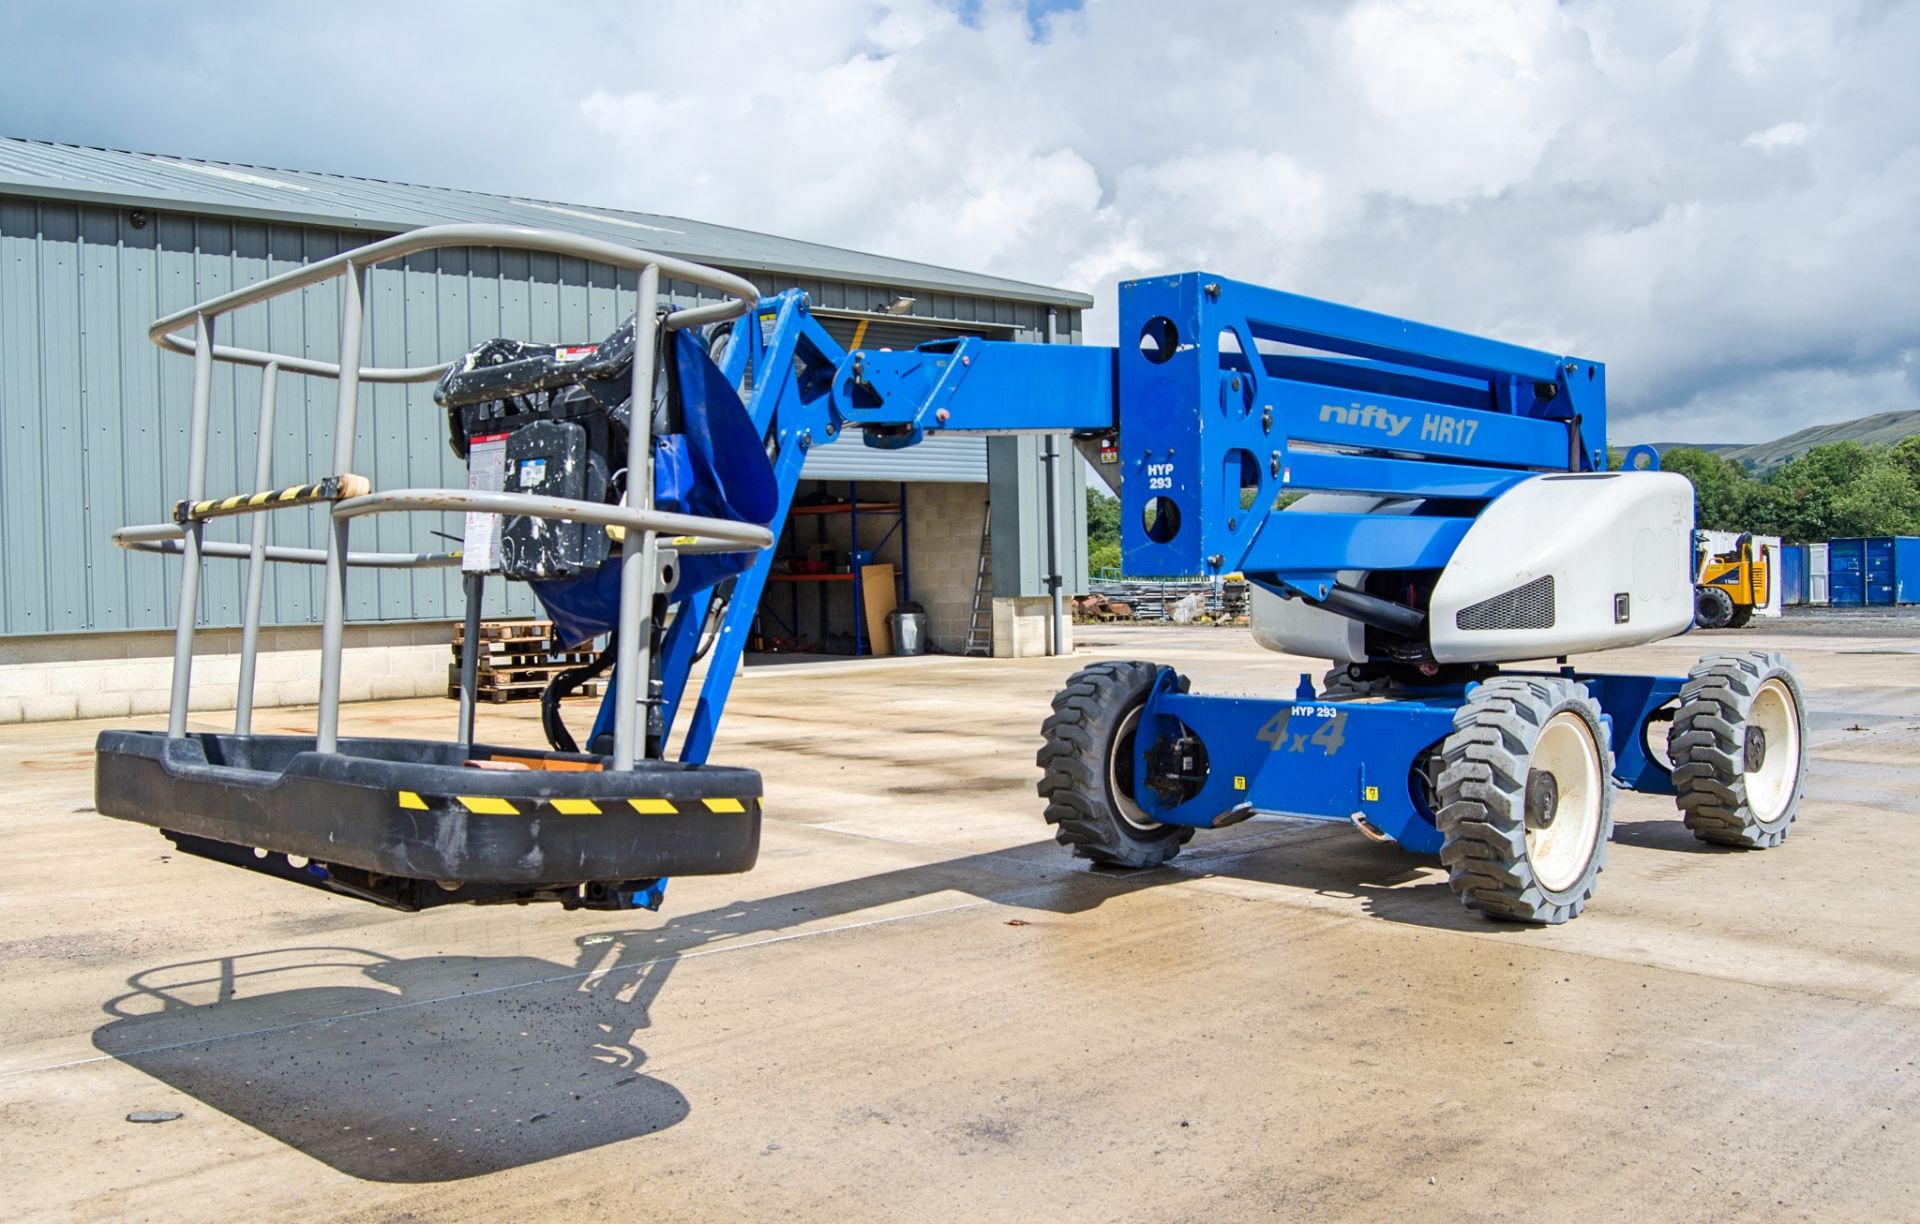 Nifty HR17 Hybrid battery electric/diesel 4WD articulated boom access platform Year: 2014 S/N: